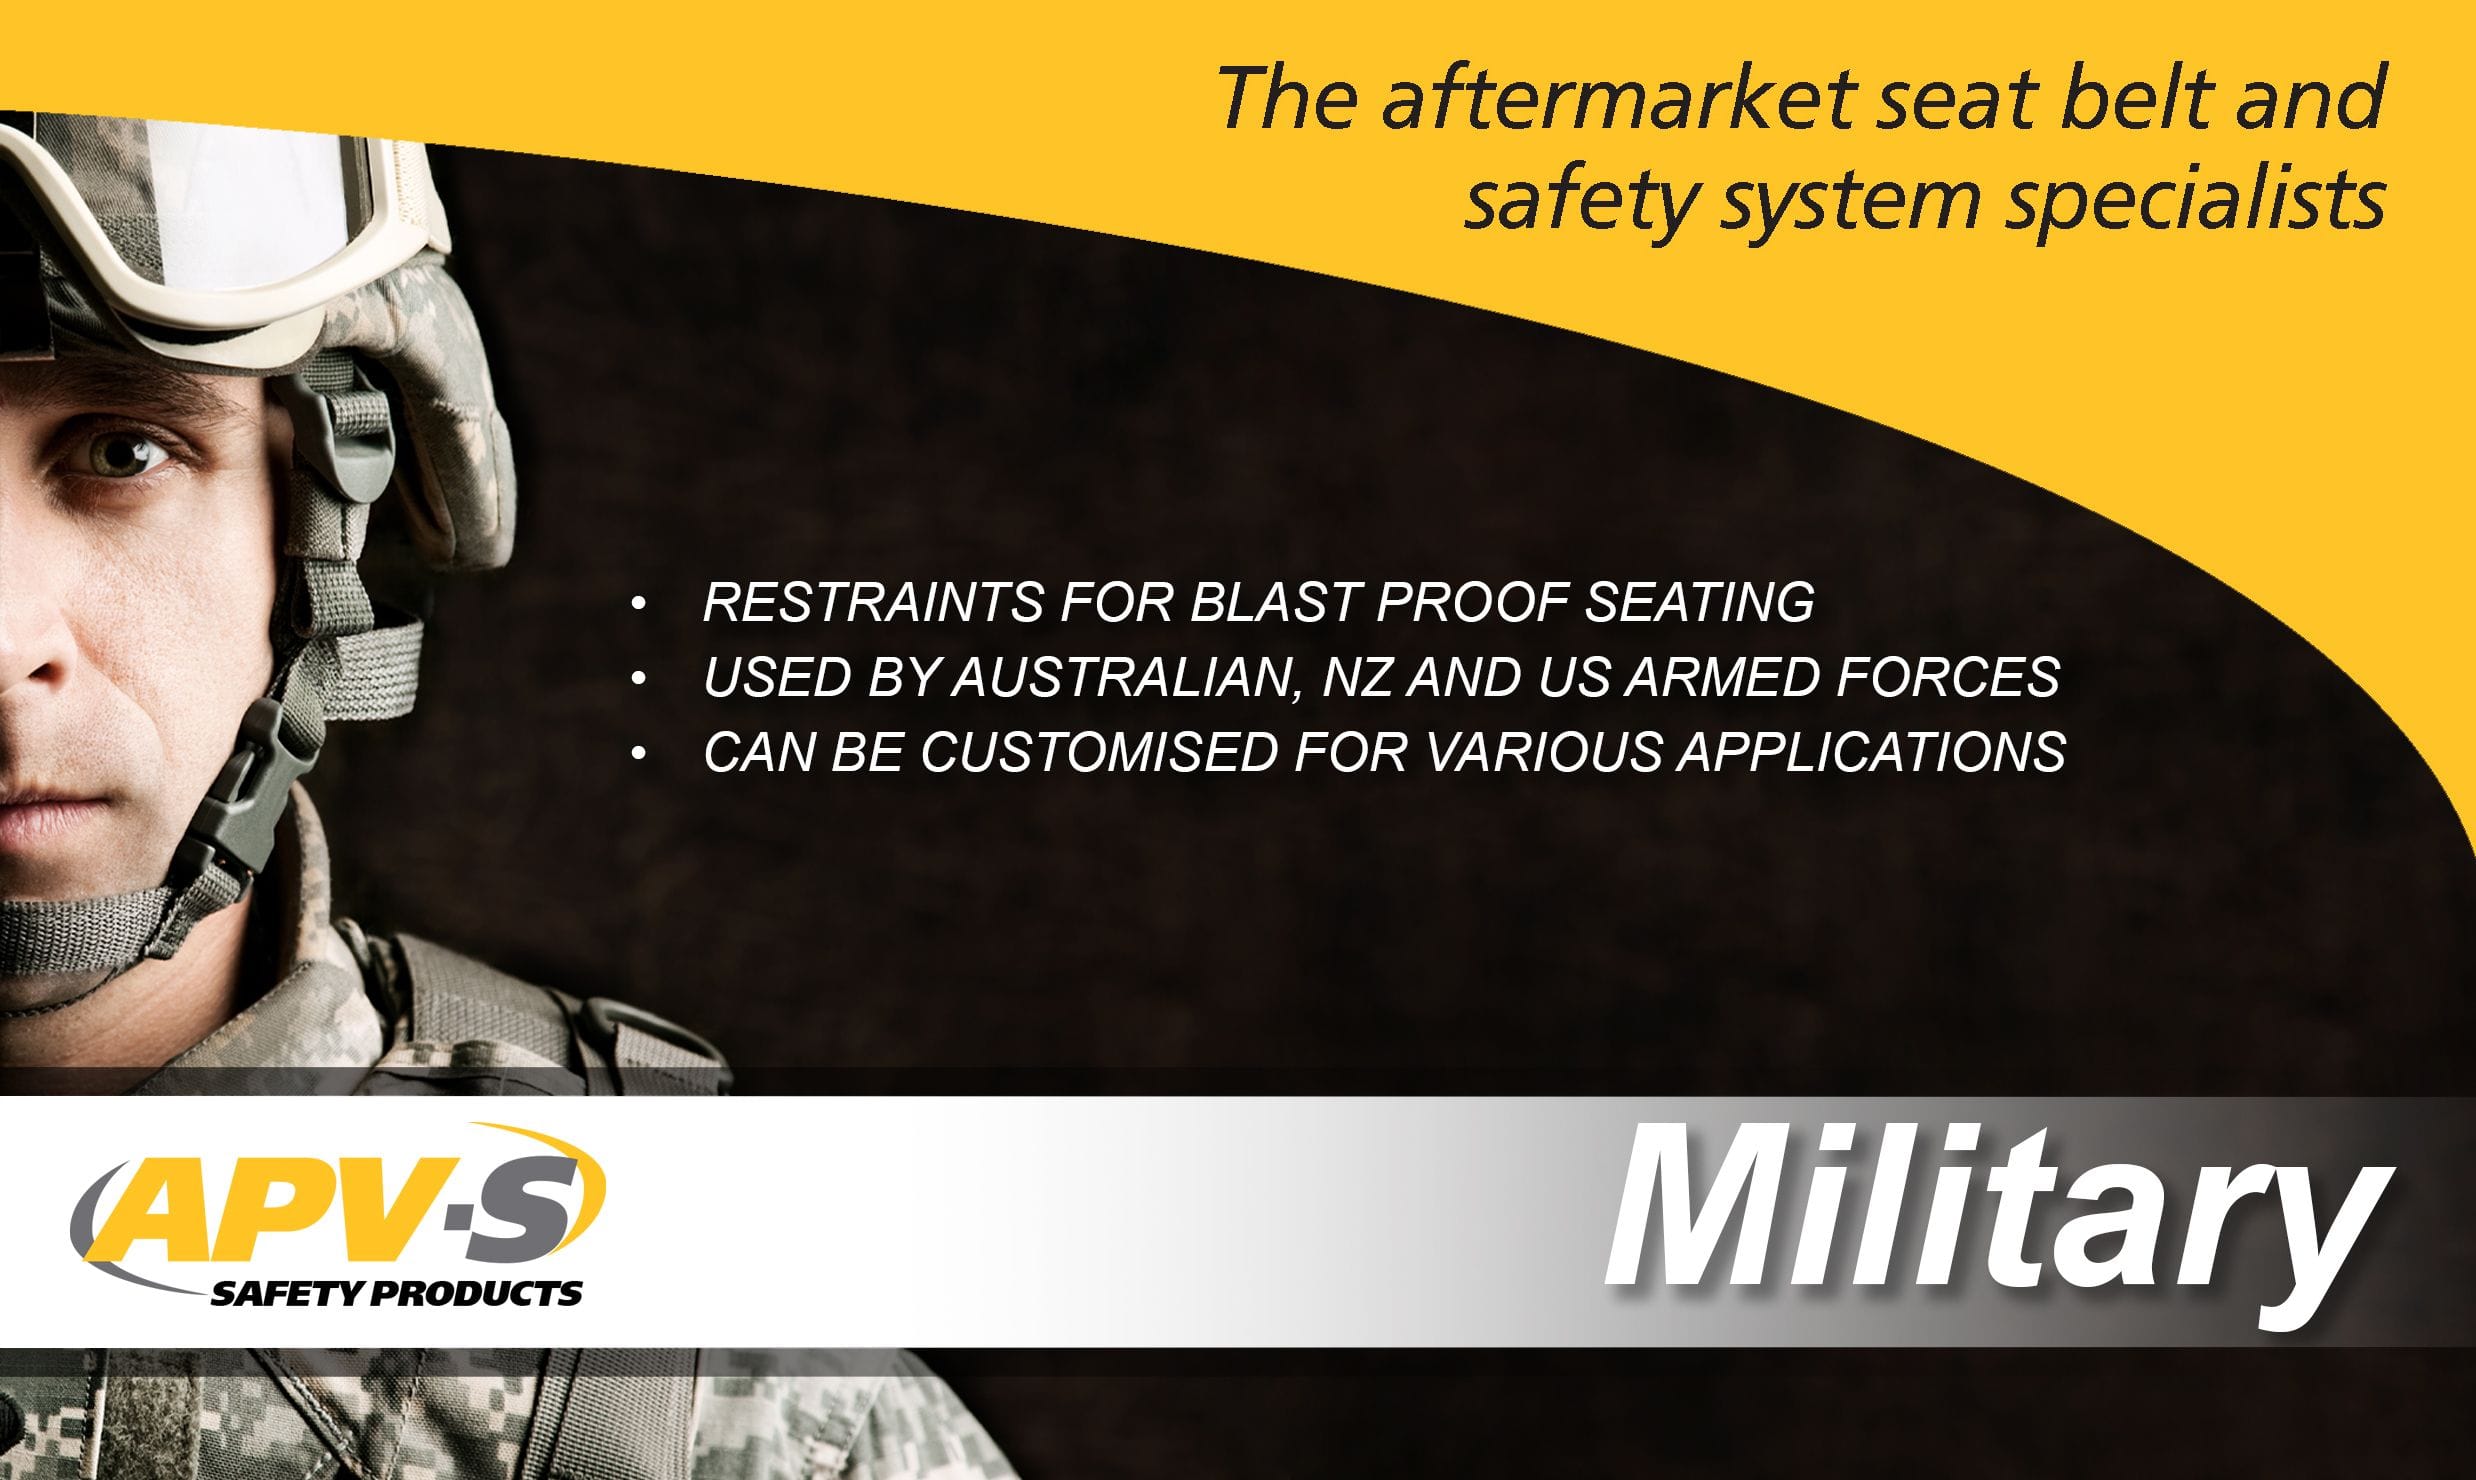 Specialised Harness products for Military application